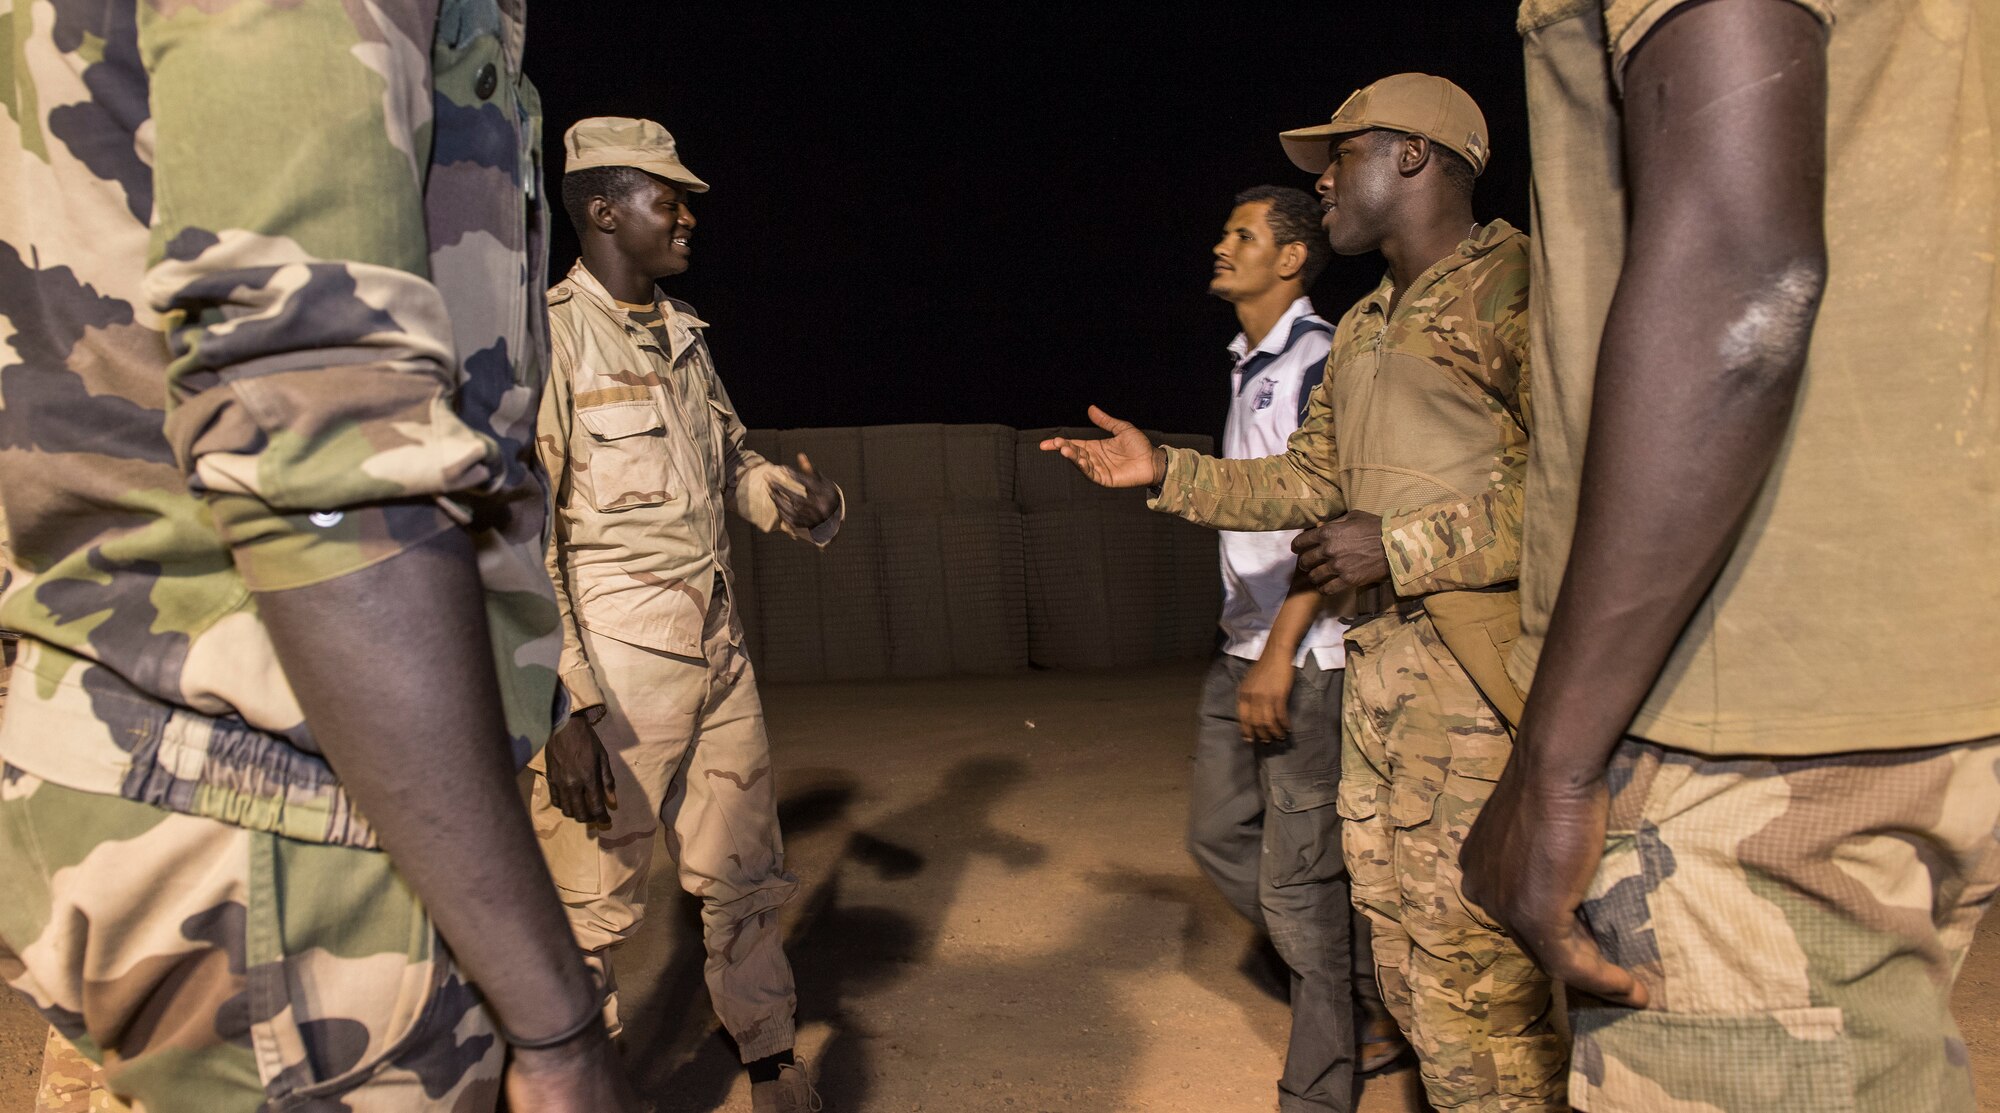 U.S. Air Force Staff Sgt. Mackenzie Isidor, 822nd Expeditionary Base Defense Squadron fire team leader, communicates with members of the Forces Armées Nigeriennes, during a night shift at Nigerien Air Base 201, in Agadez, Niger, Feb. 26, 2018. The U.S. military is in Agadez at the request of the Government of Niger, and the U.S. remain committed to helping our African partners protect their borders with matters of national security, and with other efforts important to the citizens of Niger. (U.S. Air Force photo by Tech. Sgt. Nick Wilson)